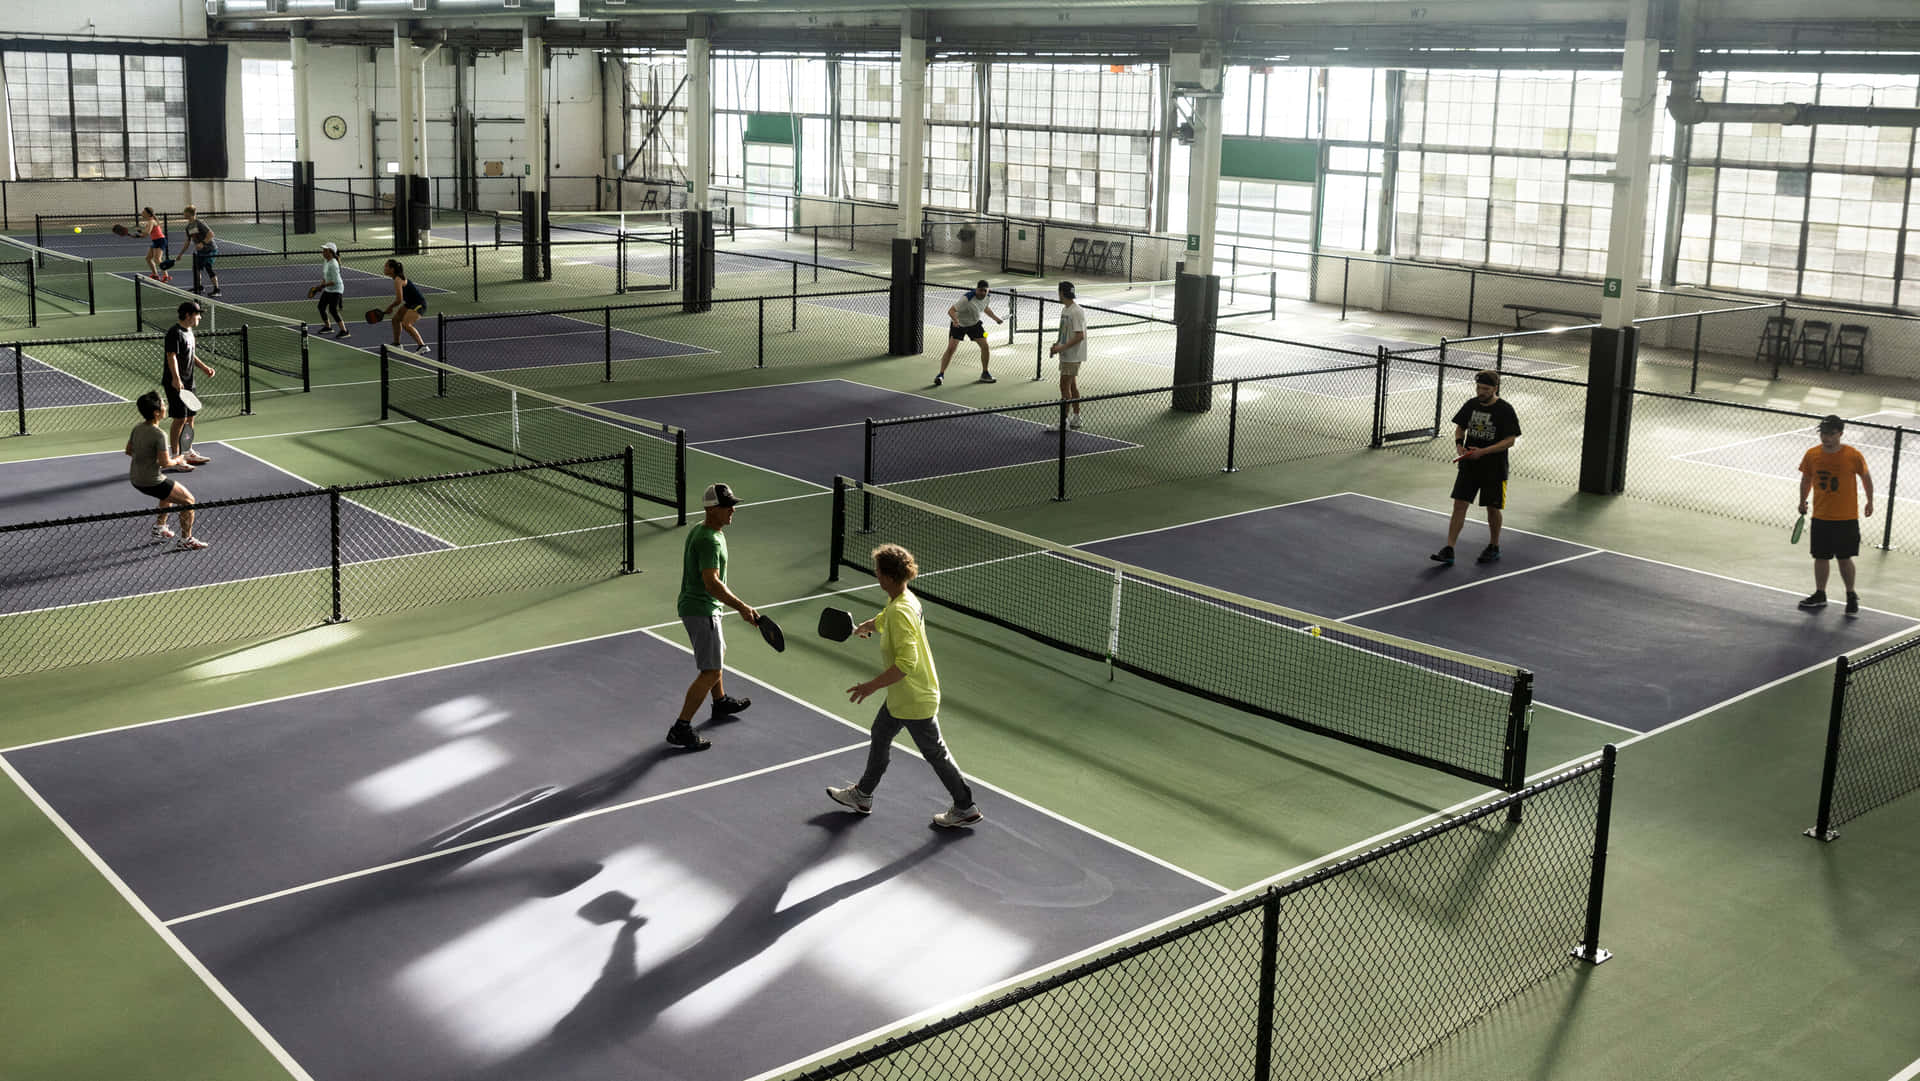 A Group Of People Playing Tennis In An Indoor Court